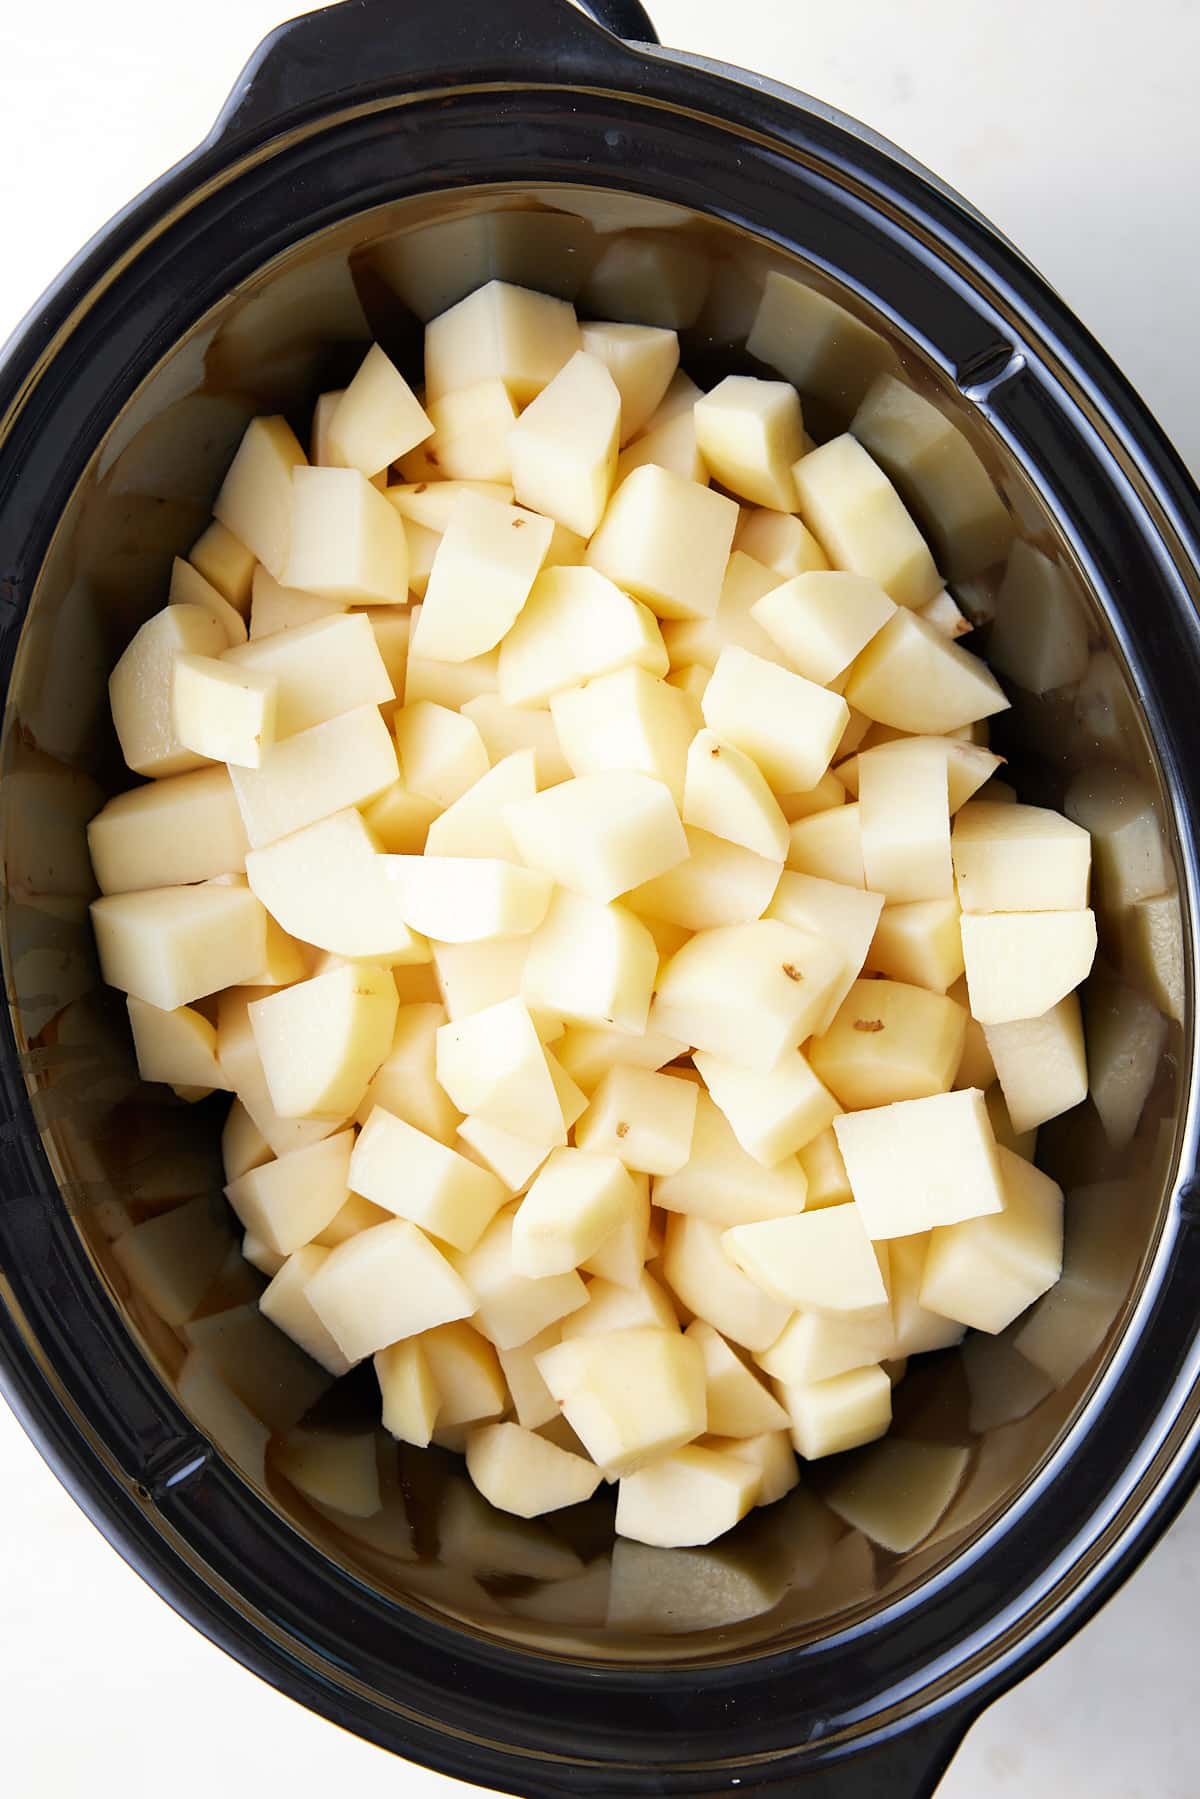 cubed potatoes in a slow cooker